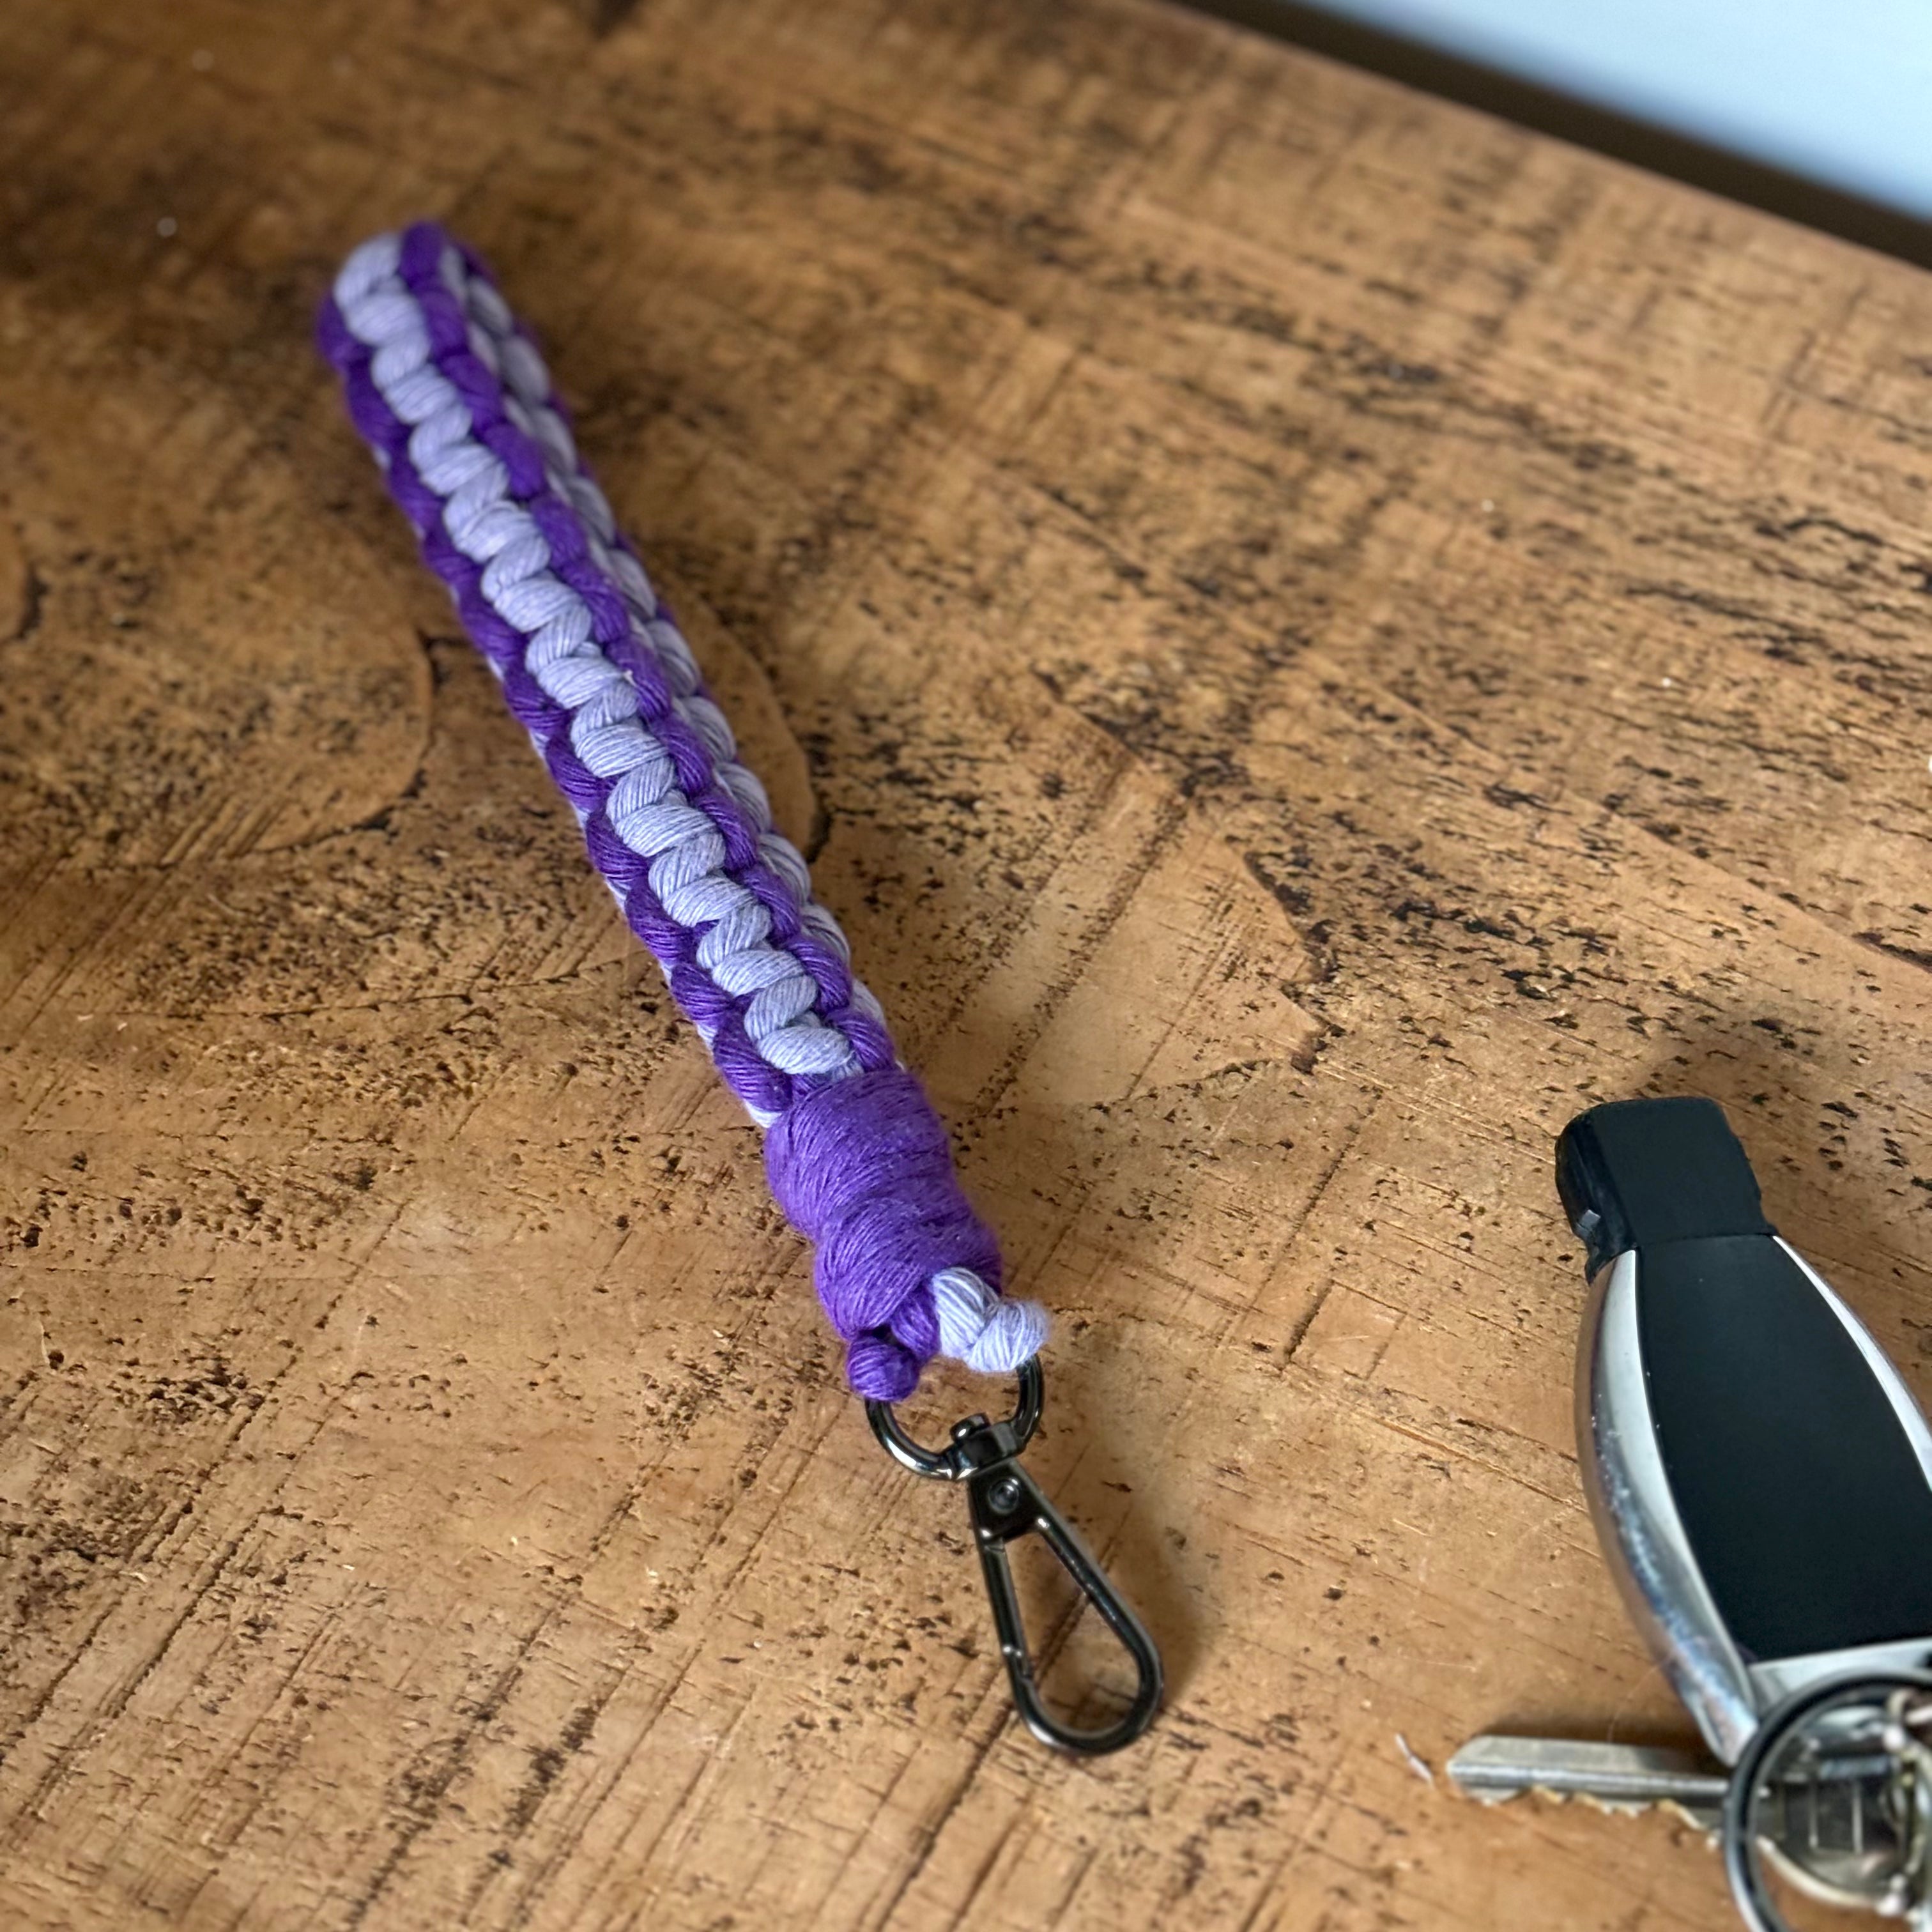 Limited Edition Tranquillity Macramé Key Ring in Sugar Plum Sparkle handmade in a premium soft cotton yarn with gunmetal hardware